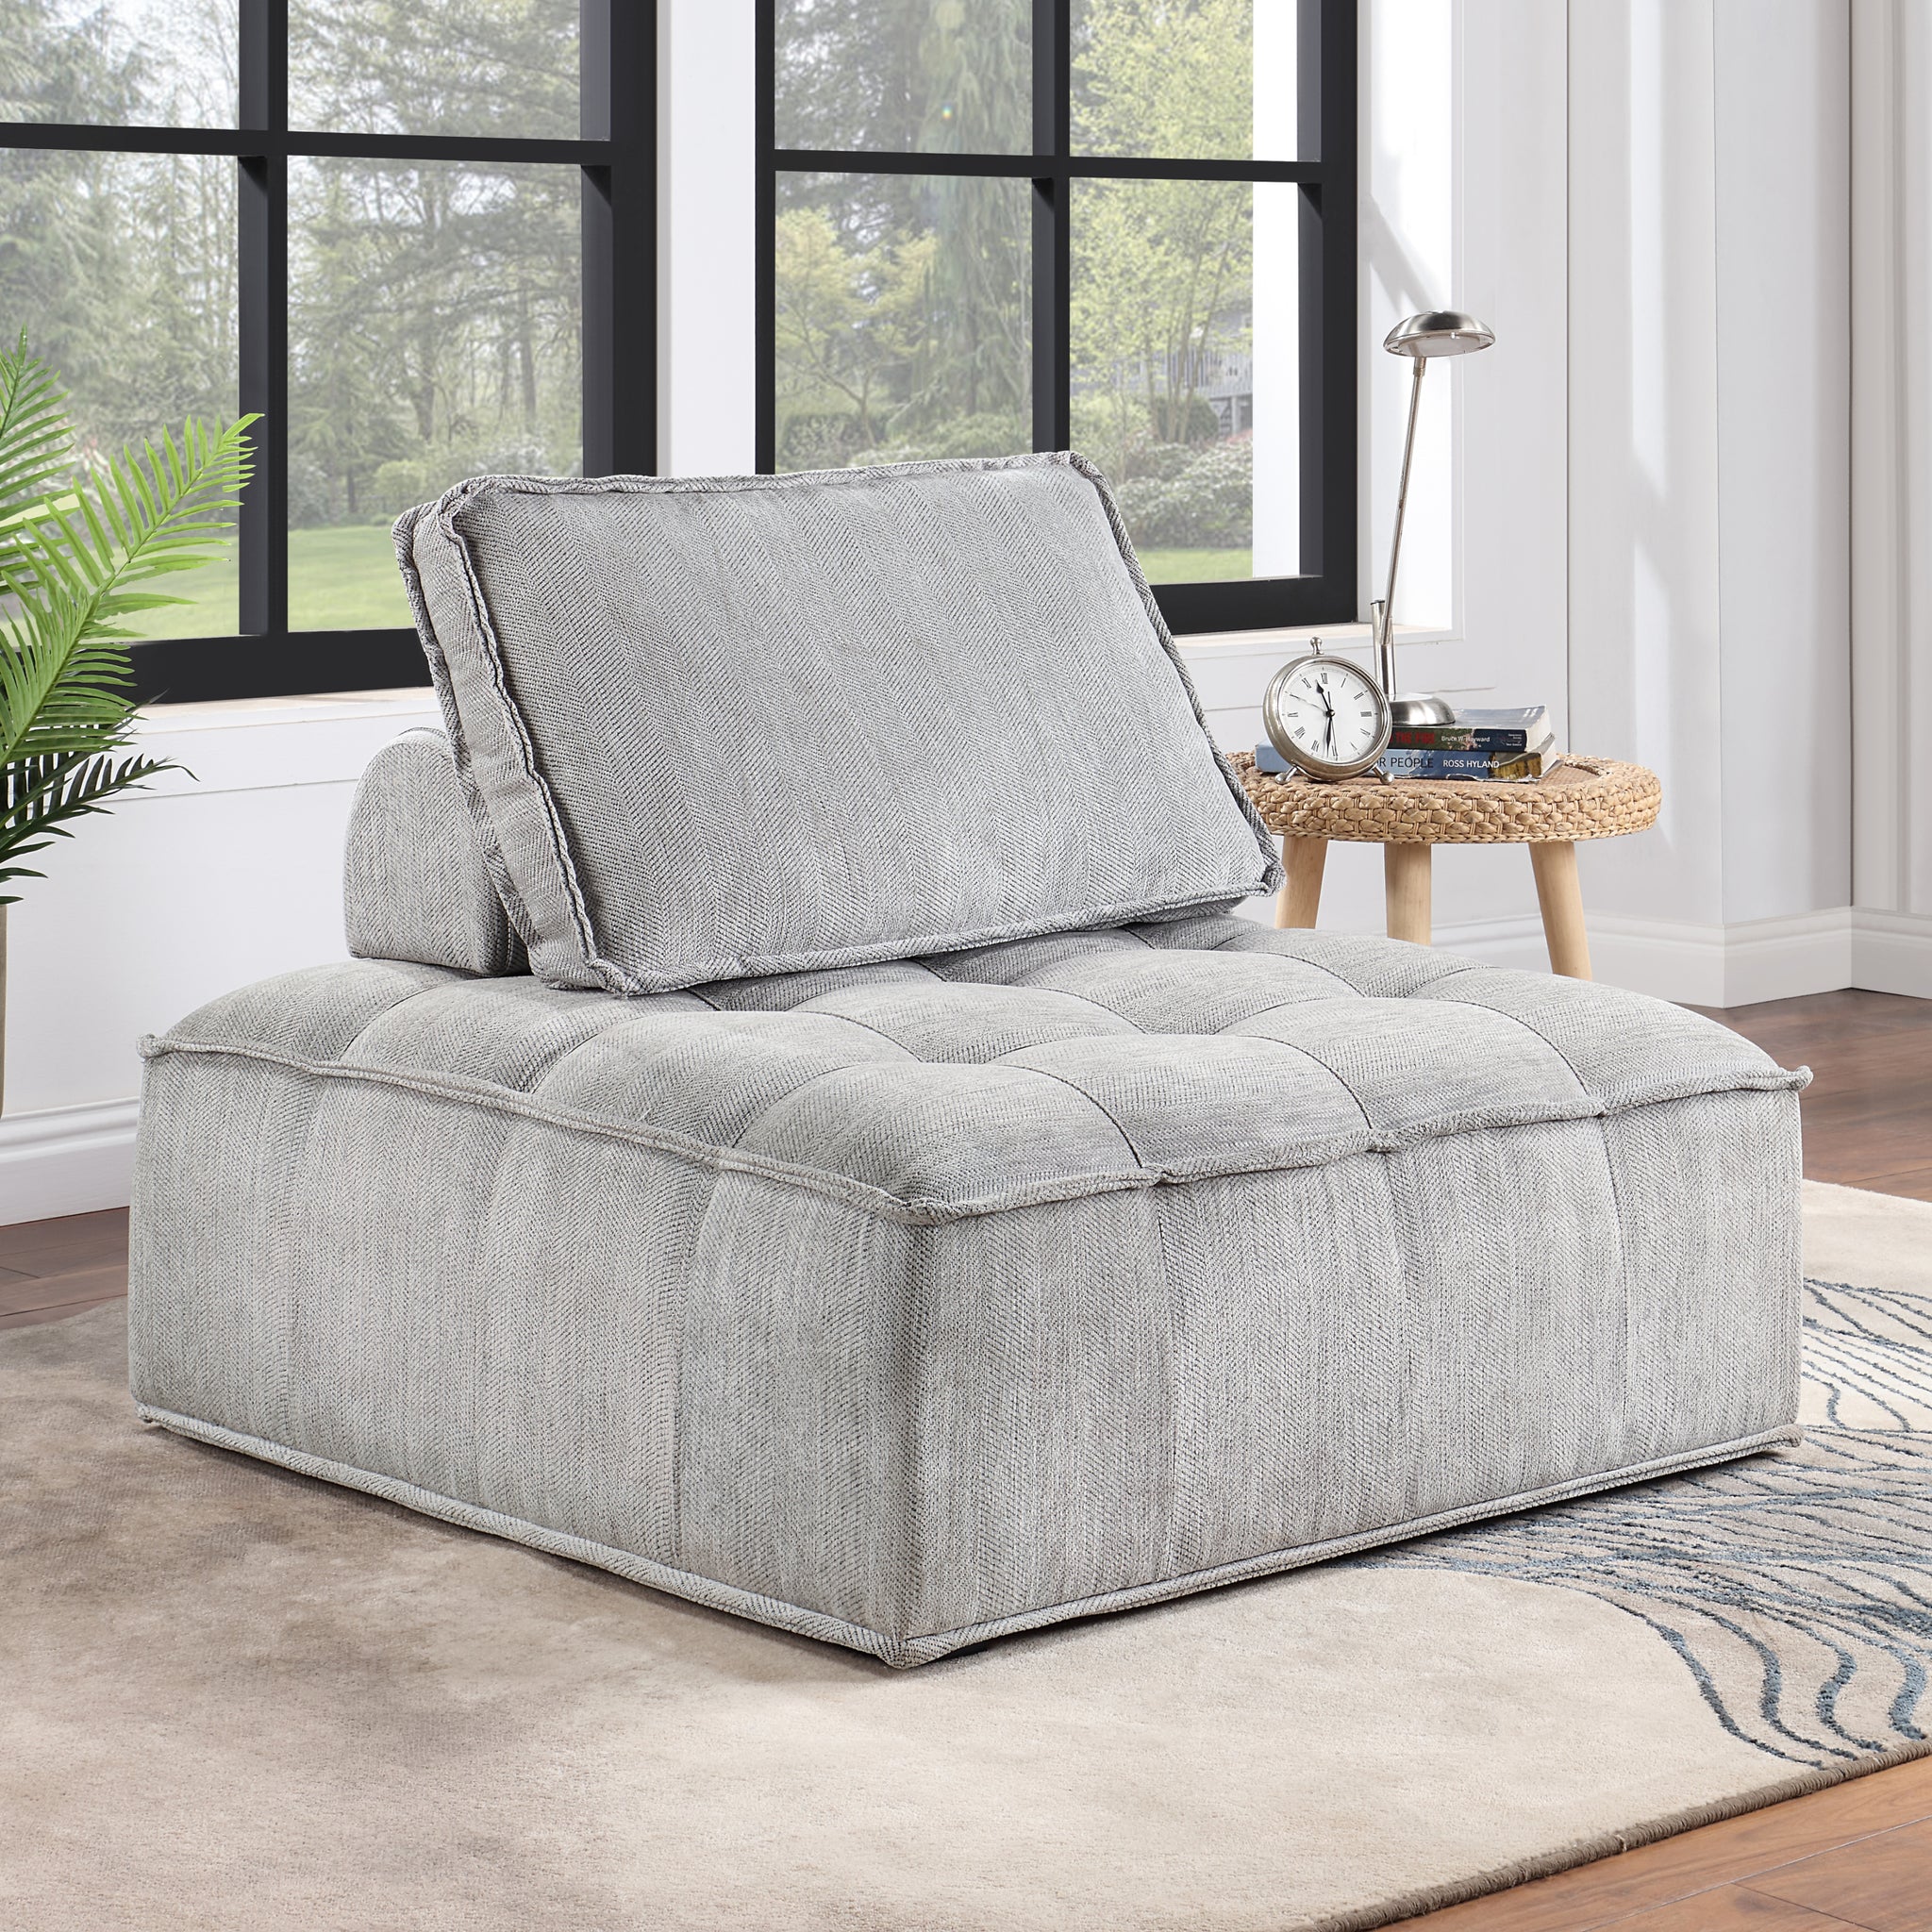 Upholstered Seating Armless Accent Chair gray-upholstered